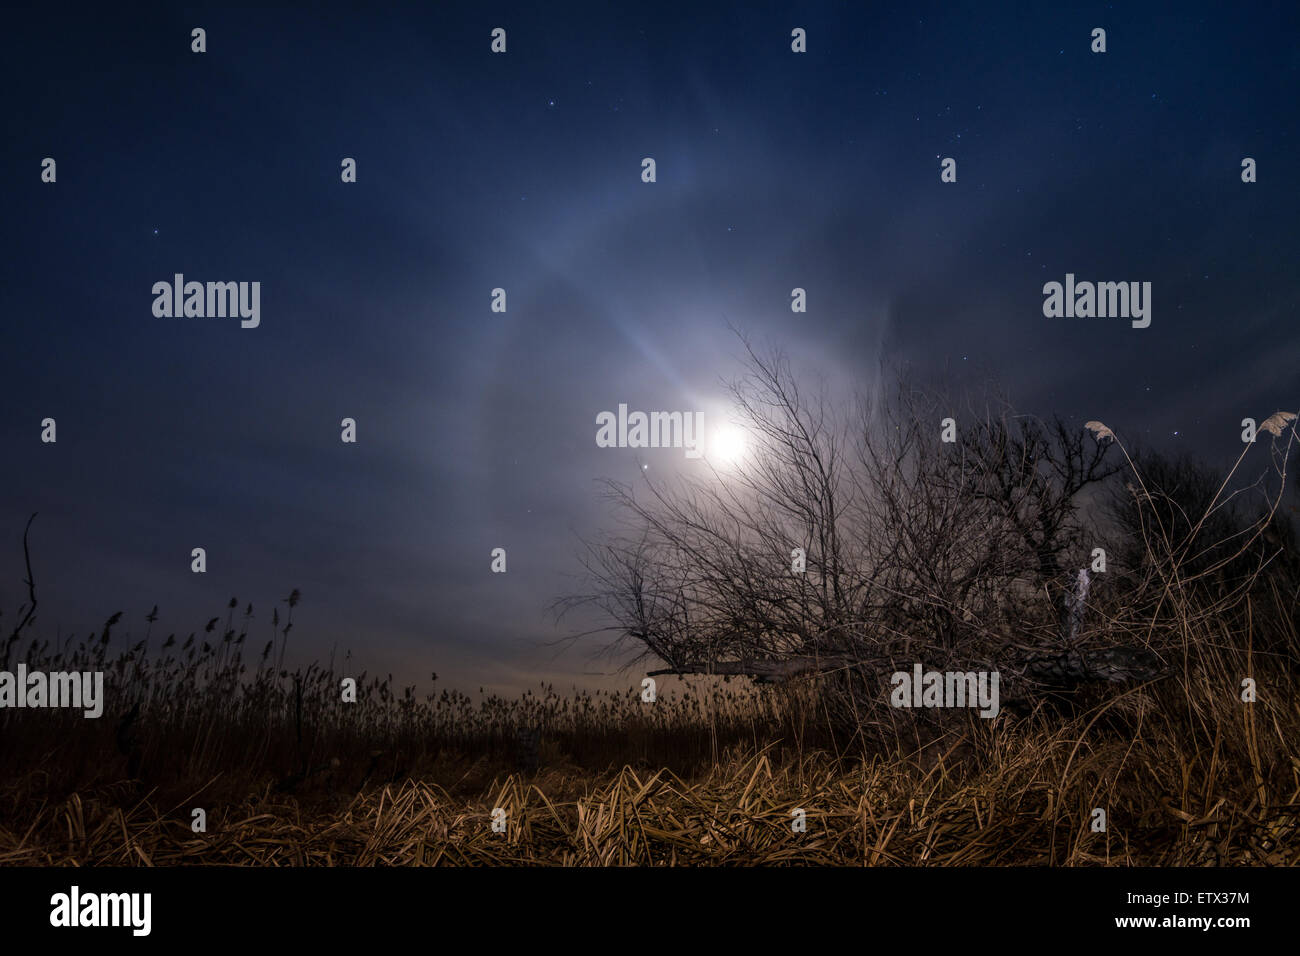 Chasing the moon - night full moon landscape background Stock Photo